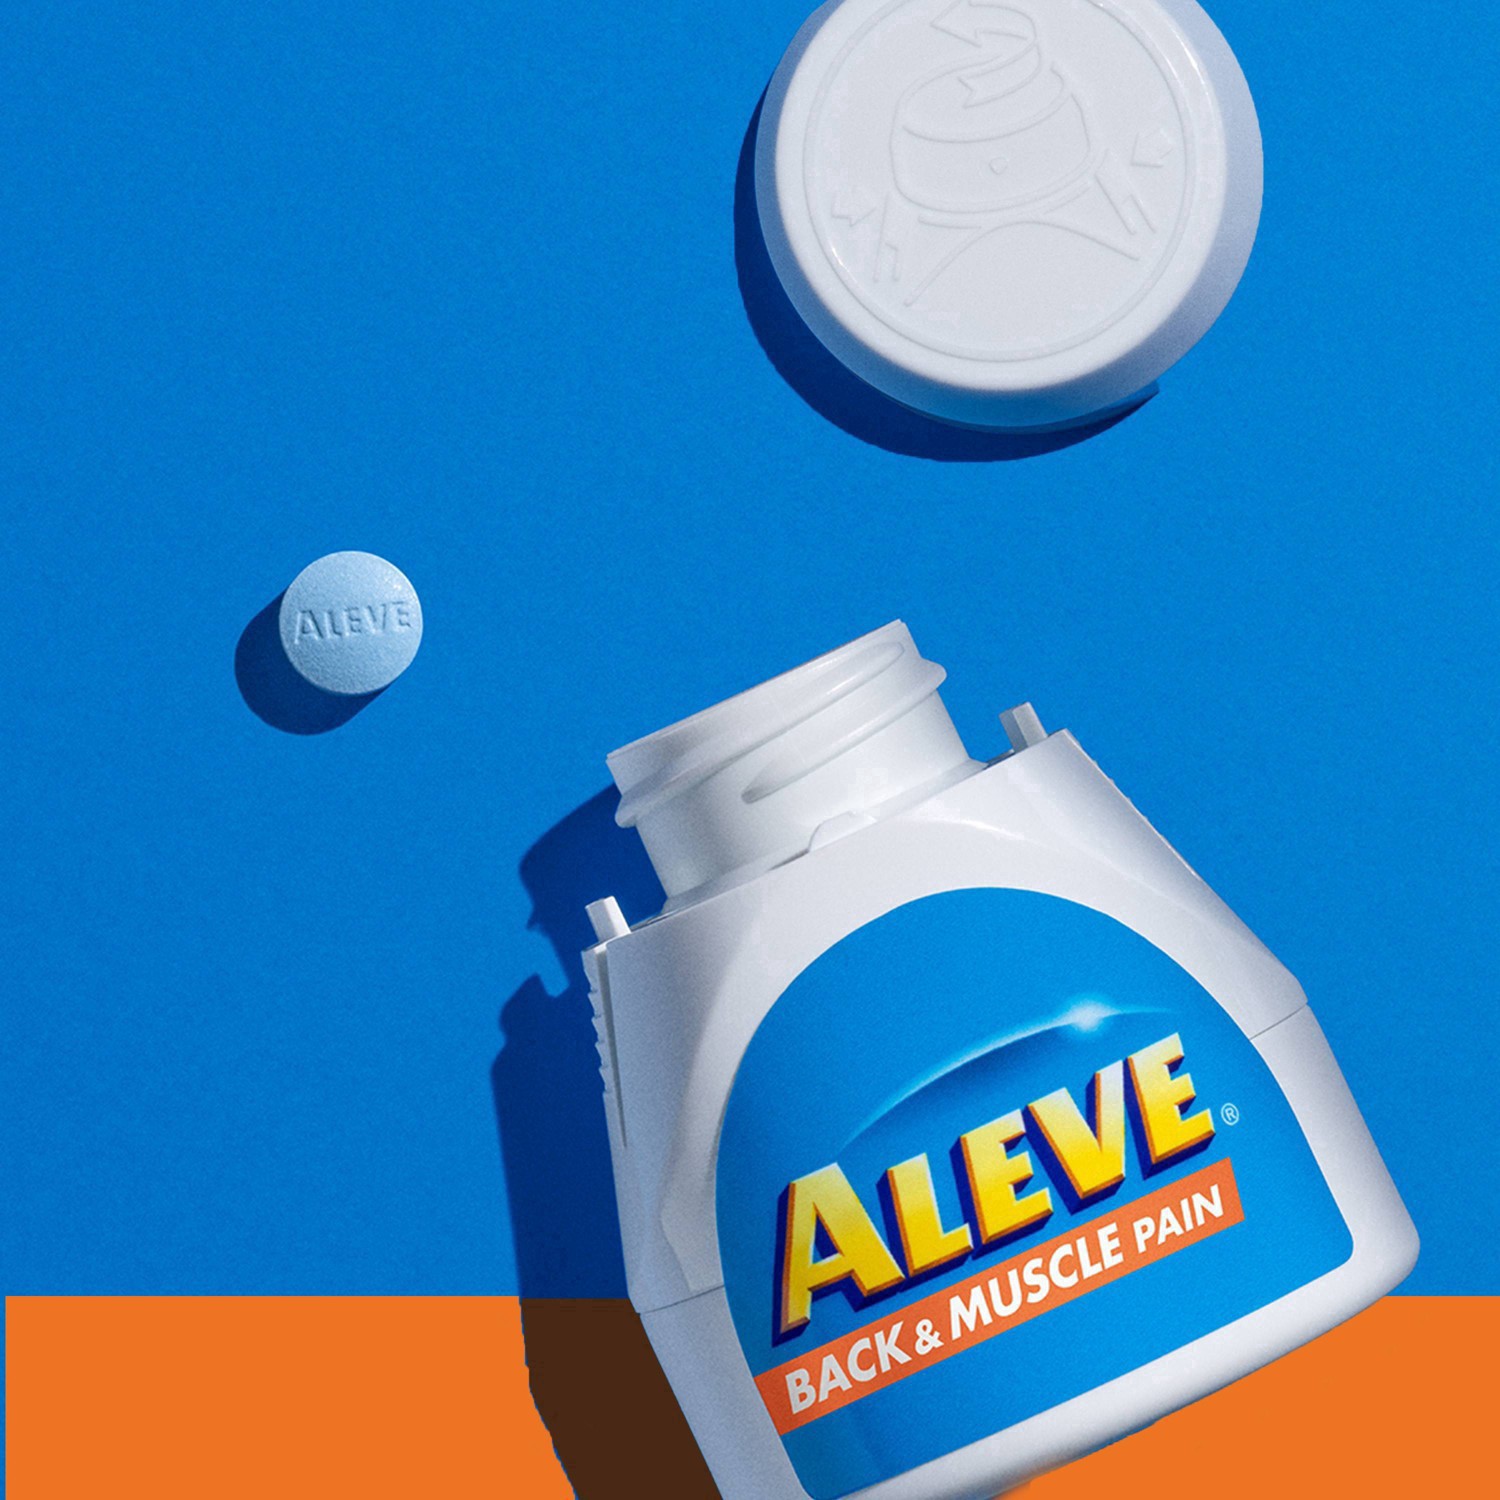 slide 60 of 73, Aleve Back & Muscle Pain Relief Naproxen Sodium Tablets, 50 ct